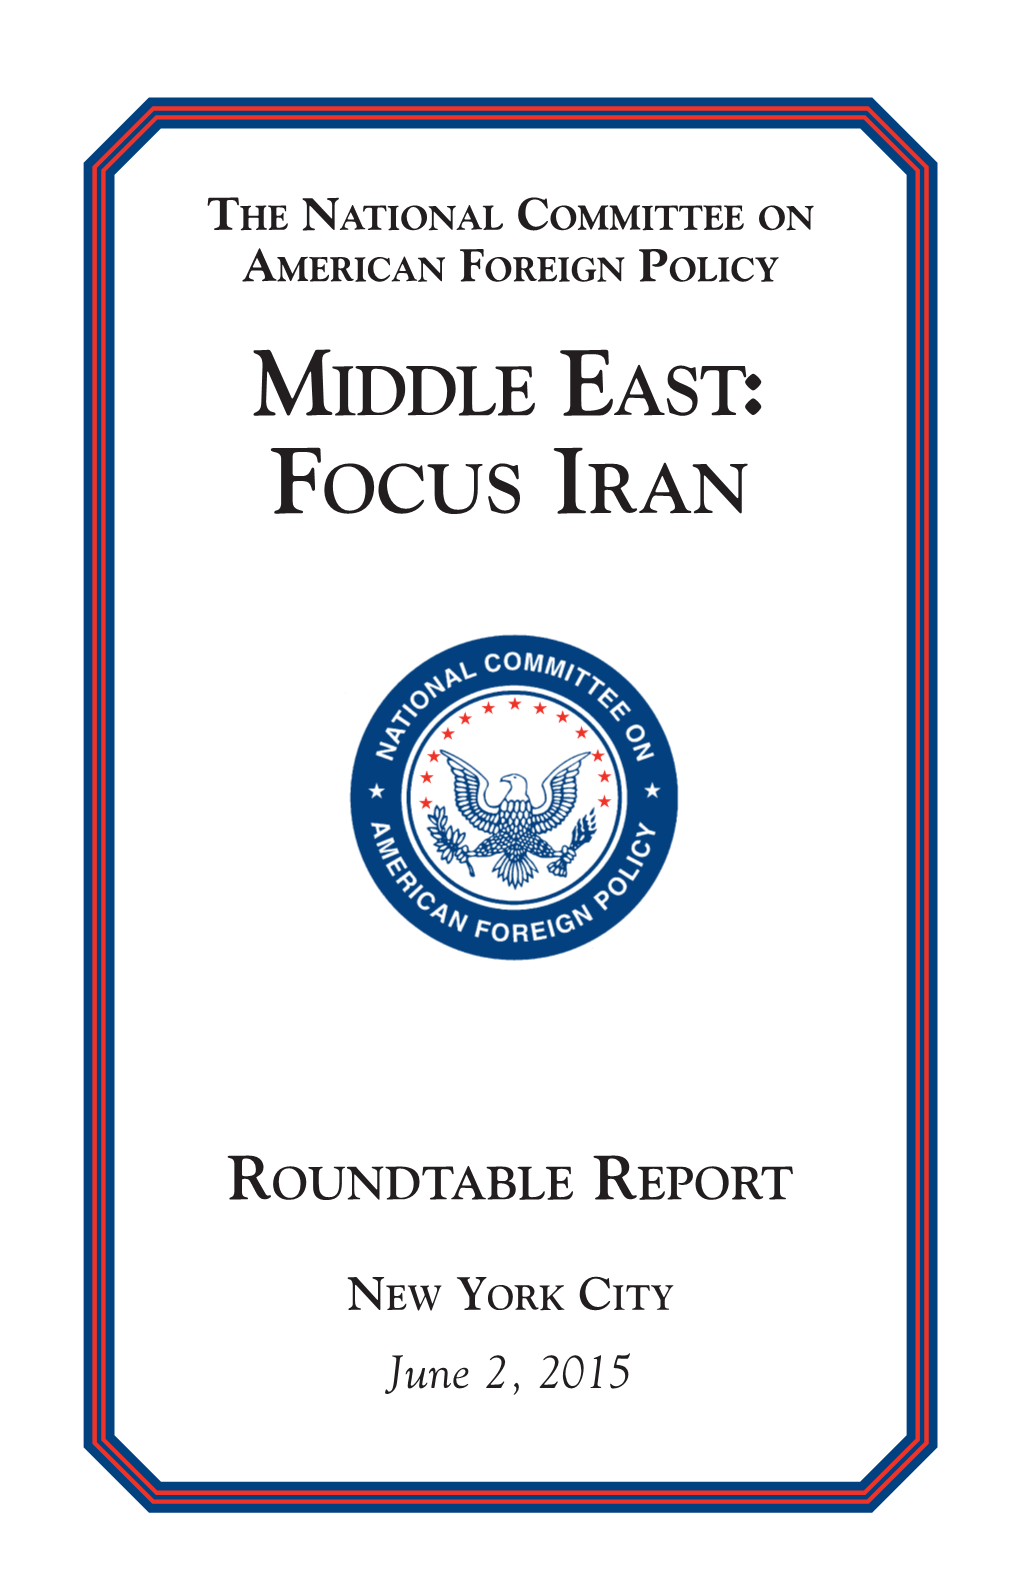 Middle East: Focus Iran